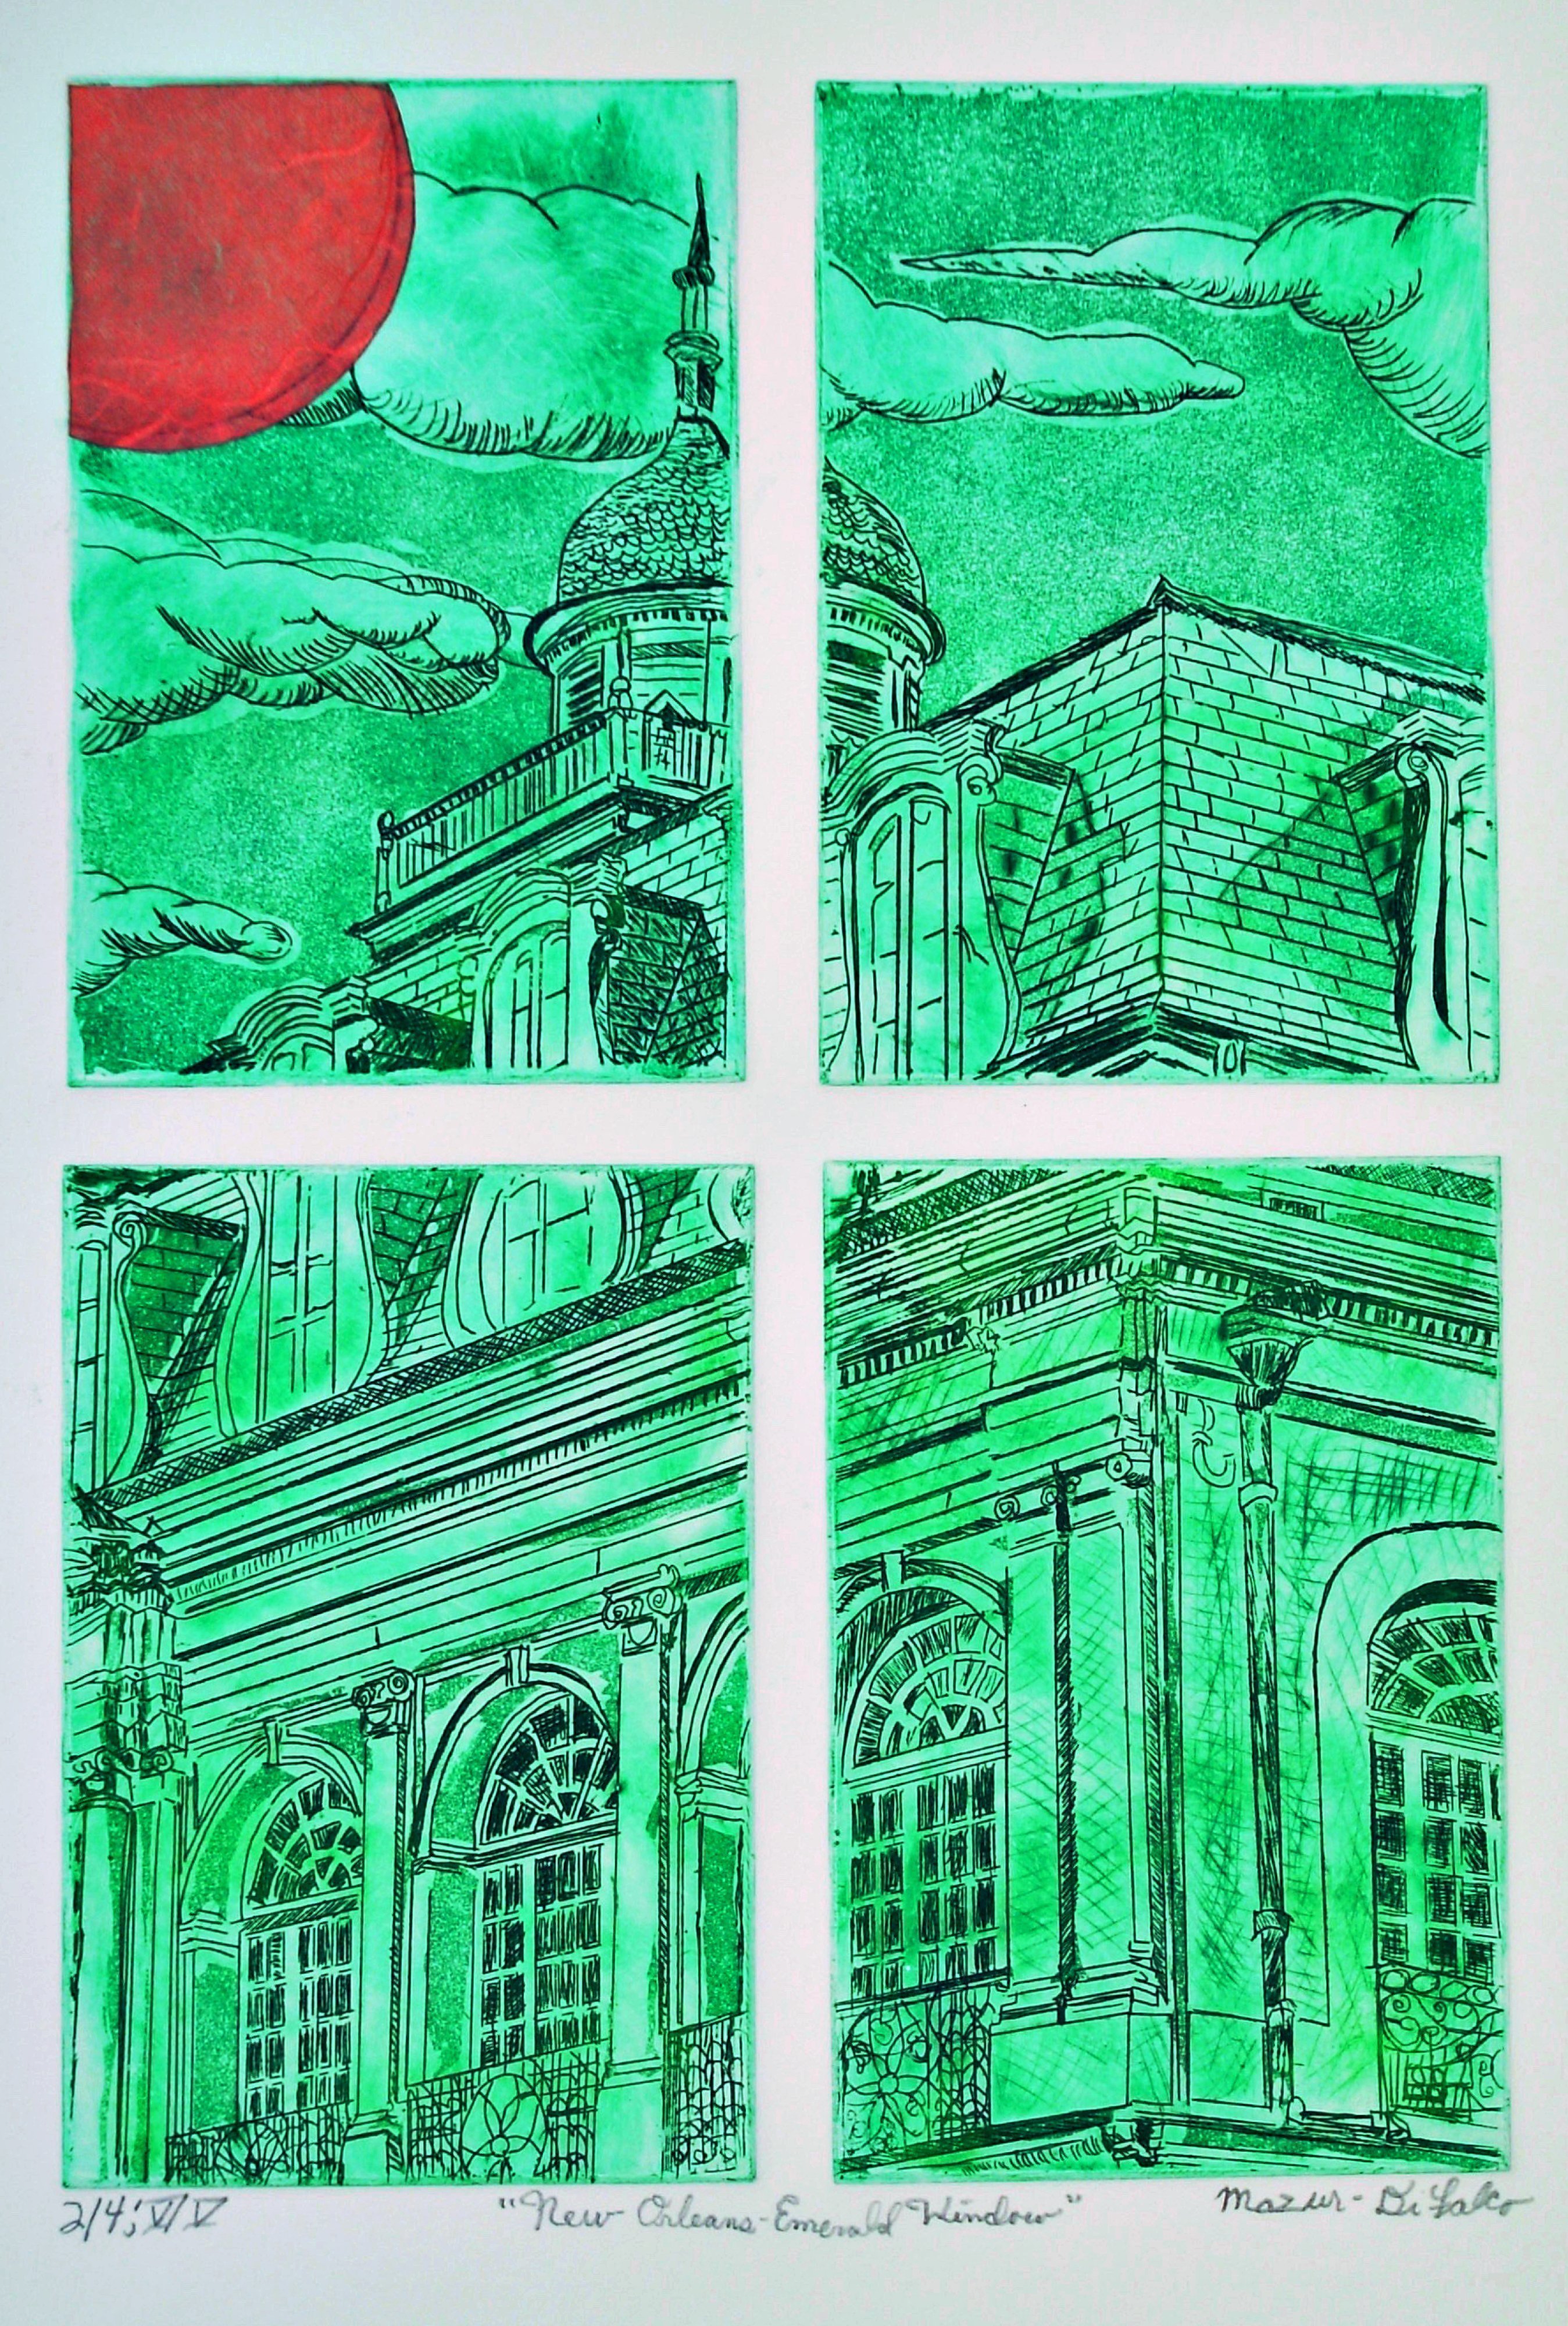 Jerry  Di Falco, 'New Orleans Emerald Window', 2019, original Printmaking Intaglio, 18 x 24  inches. Artwork description: 4683 Jerry Mazur- DiFalco created this distinctive etching via the employment of four separate zinc plates, which were placed simultaneously on the printing press bedaEUR